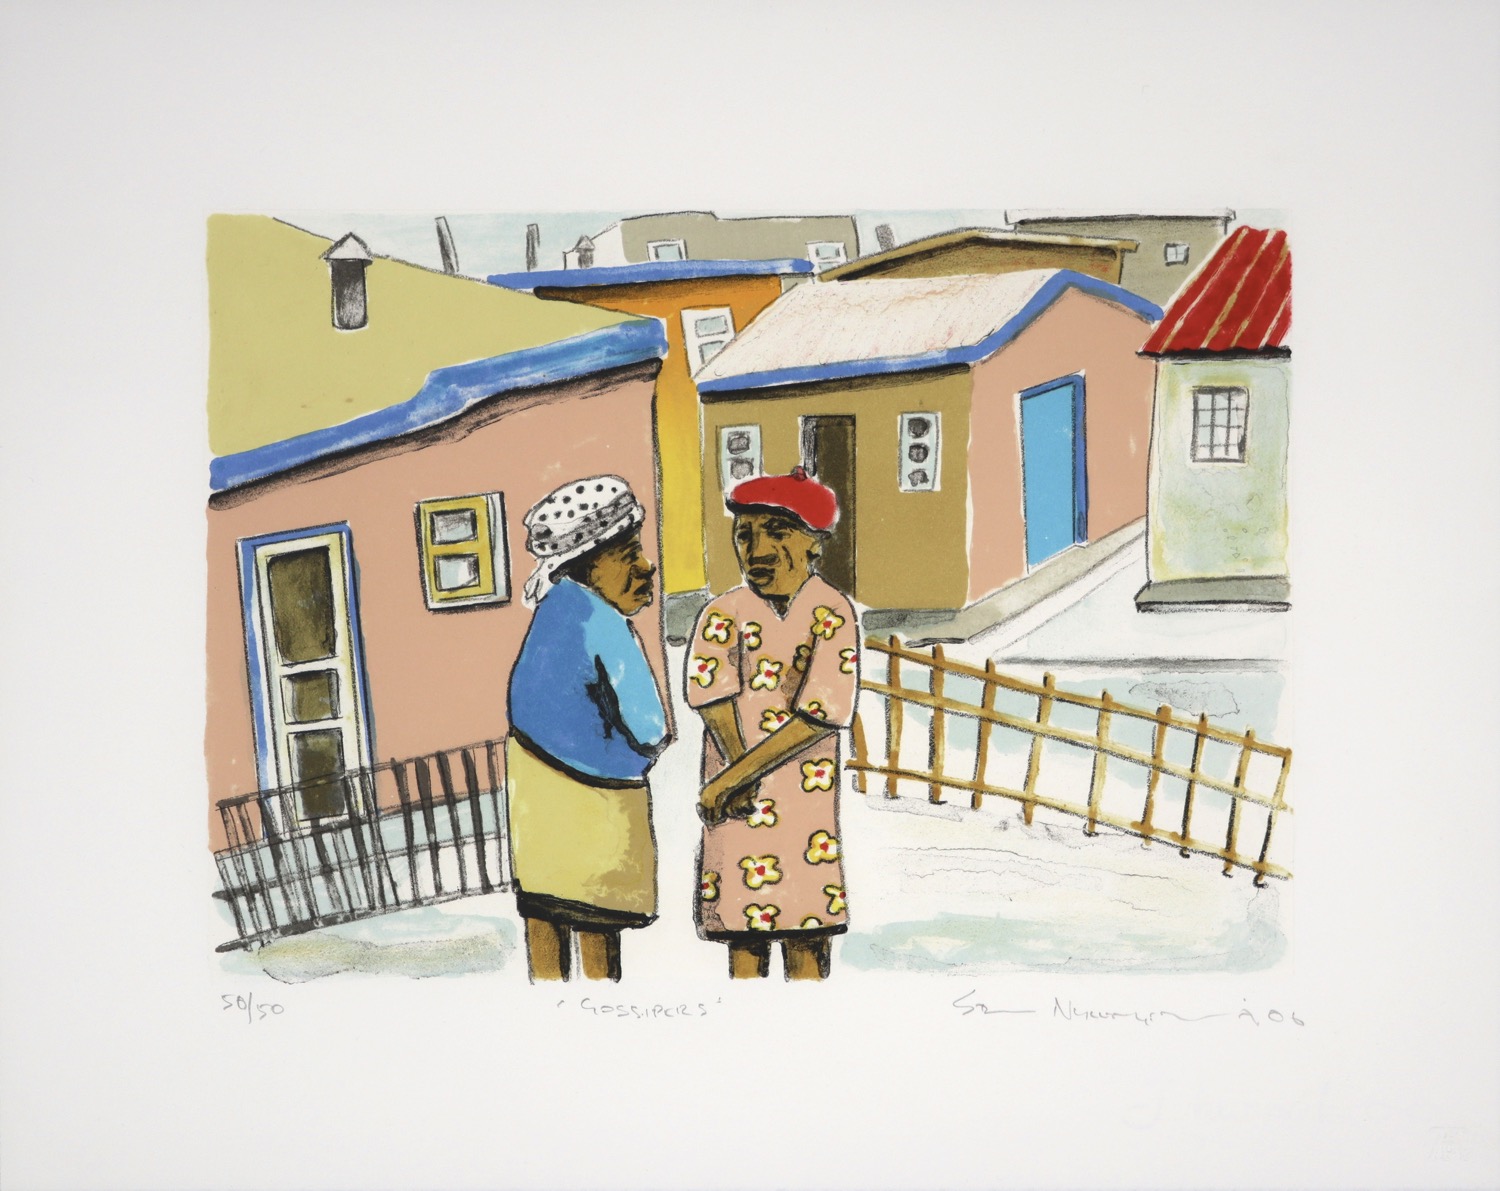 Two elderly women in the foreground talking with South African township scene behind them